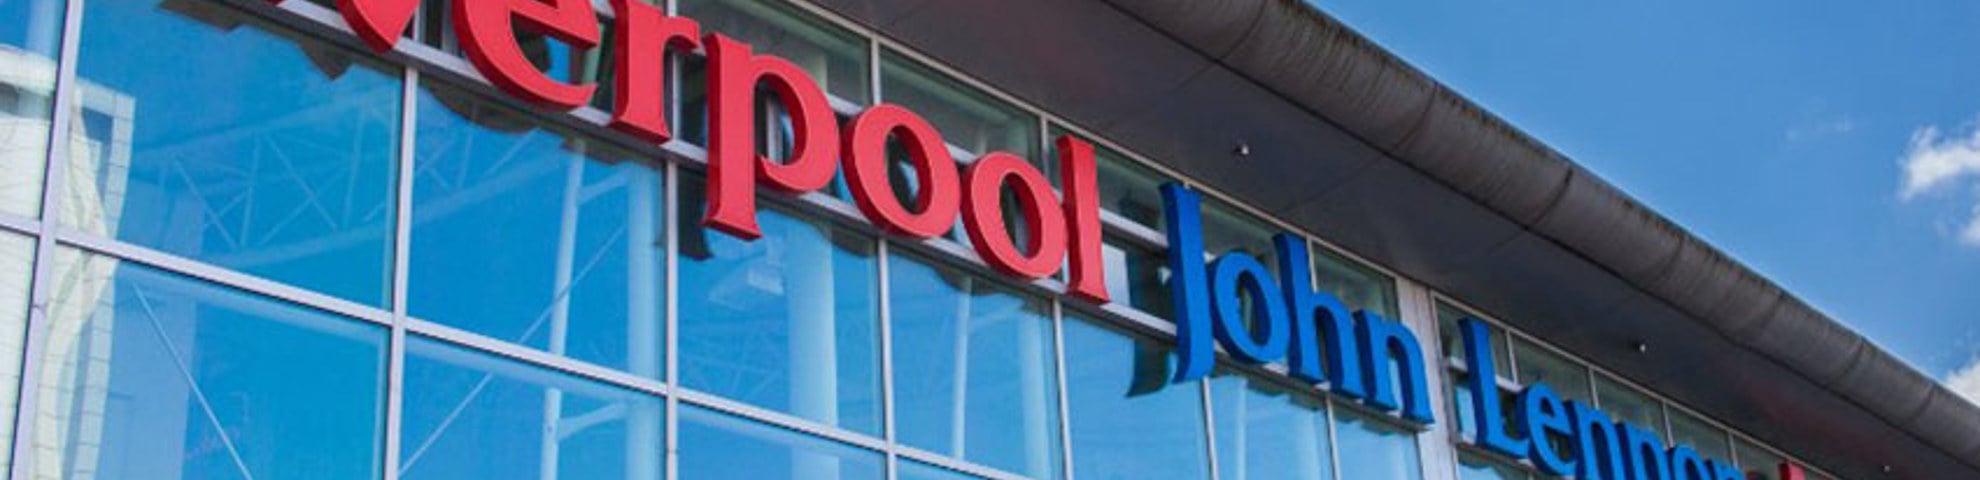 Signage of Liverpool John Lennon Airport's logo on a glass building. A blue sky appears above. 